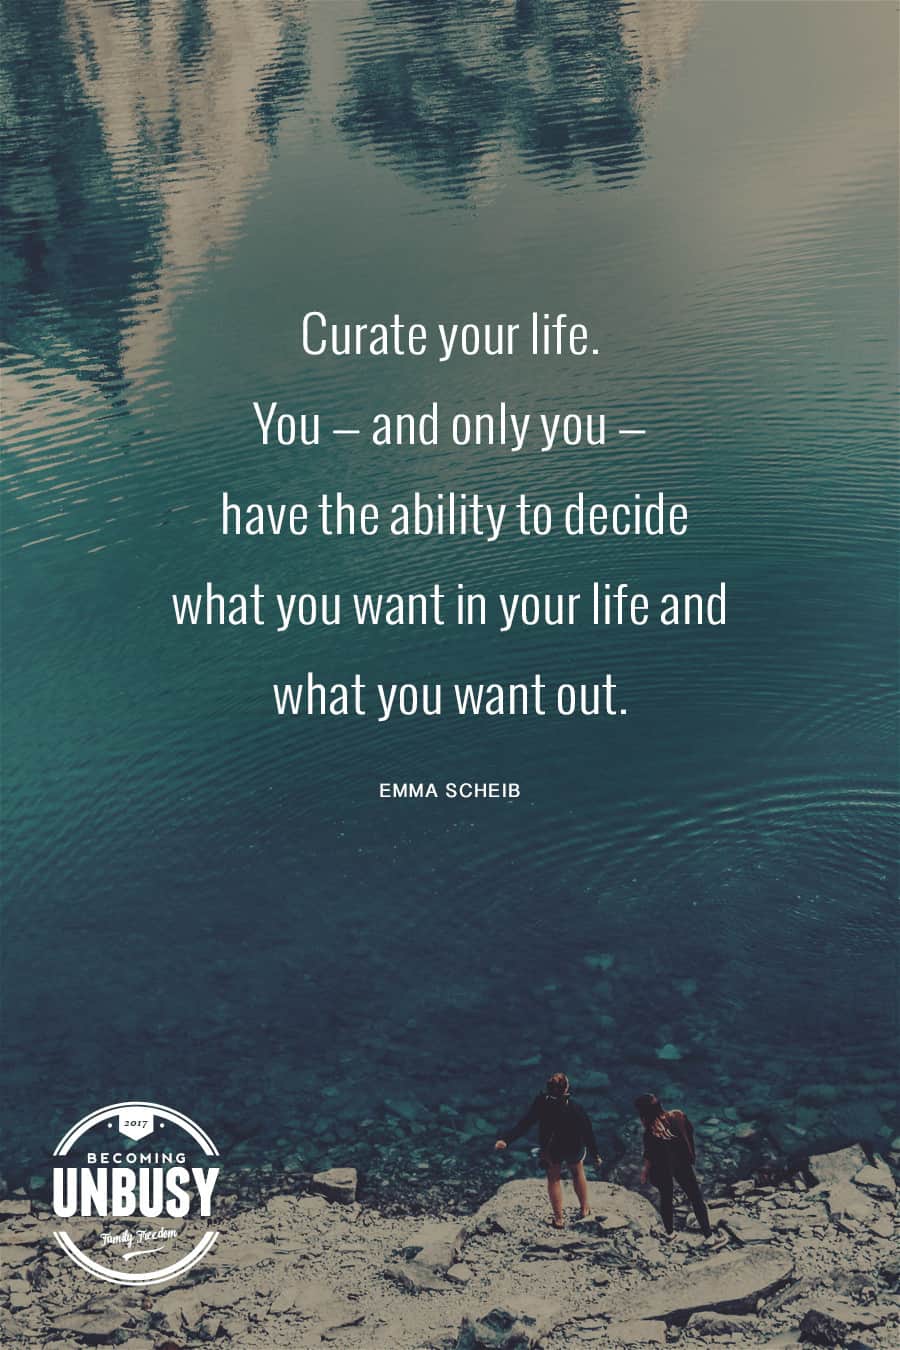 Curate your life. You — and only you — have the ability to decide what you want in your life and what you want out. #quote #simpleliving #BecomingUnBusy *Love this quote and this site